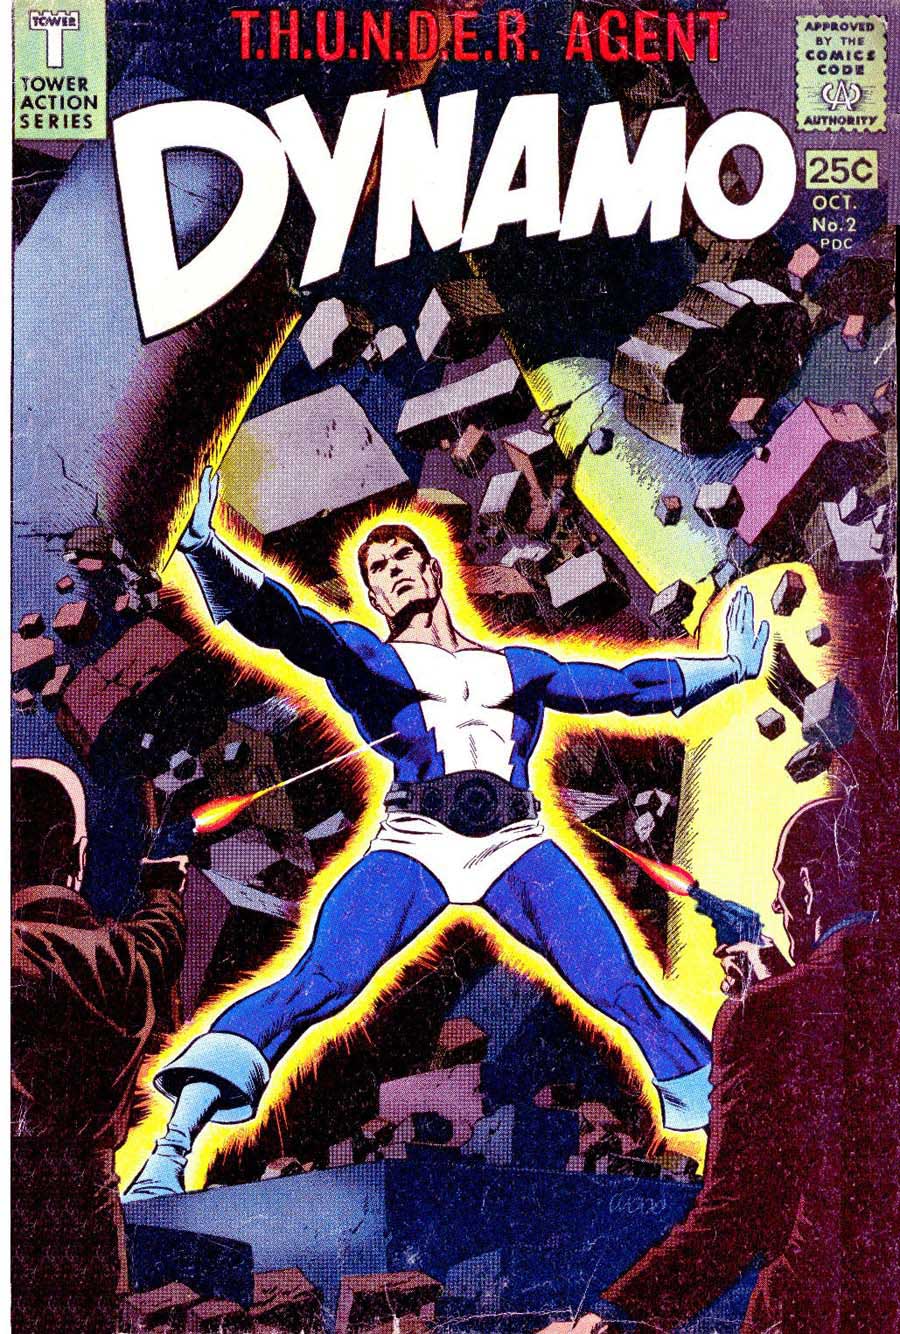 Dynamo v1 #2 tower 1960s silver age comic book cover art by Wally Wood